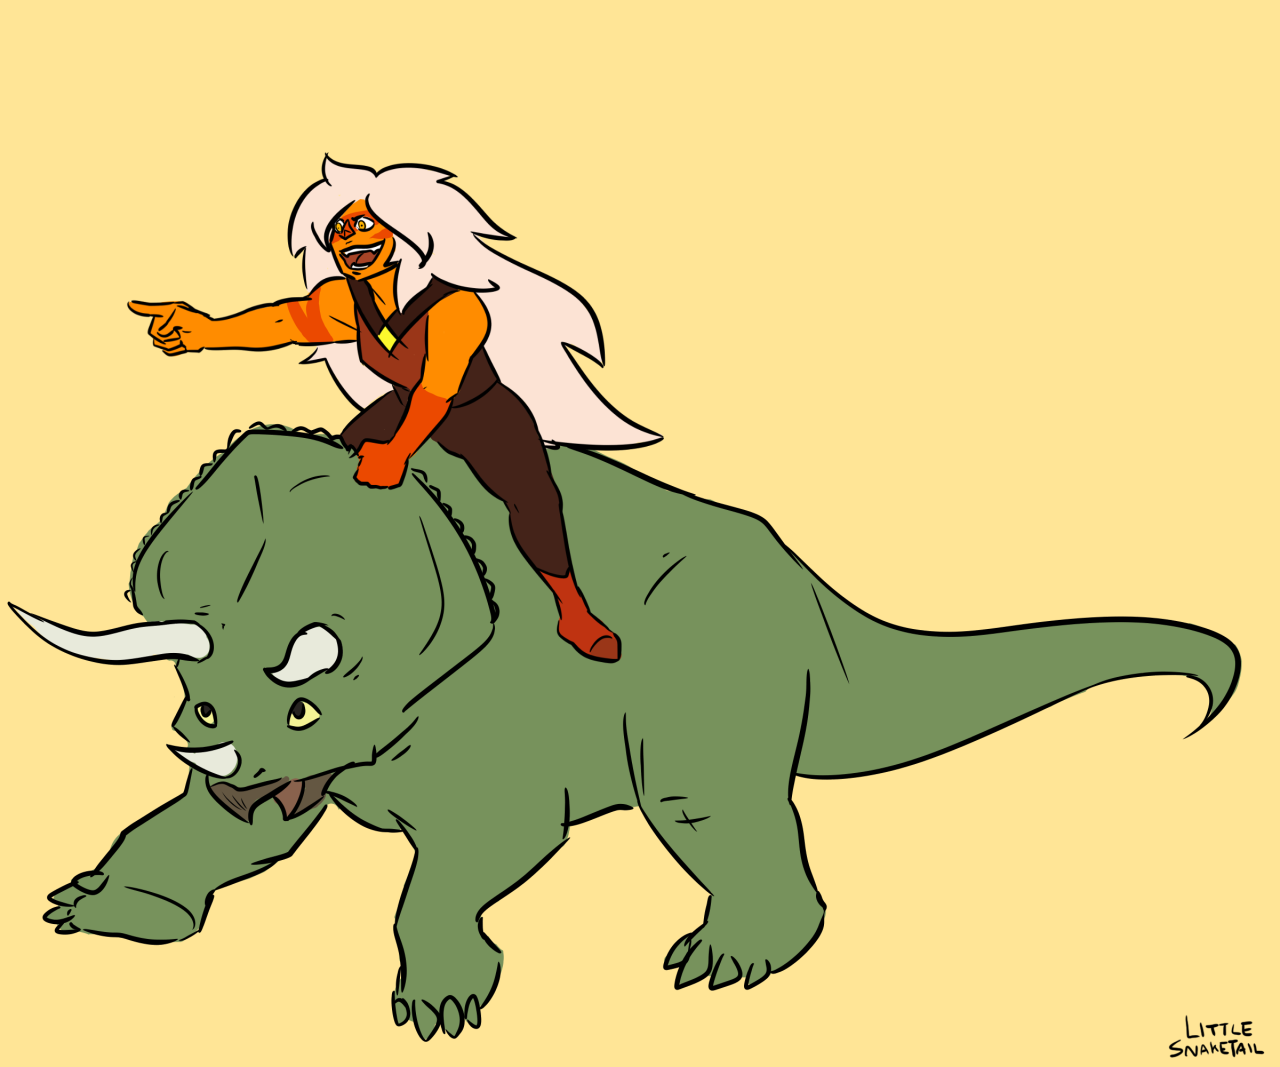 mezoic said: Hey snake, can you draw Jasper riding on a triceratops, thanks. Answer: Man it’s been ages since I’ve properly drawn a dinosaur… I used to love them so much